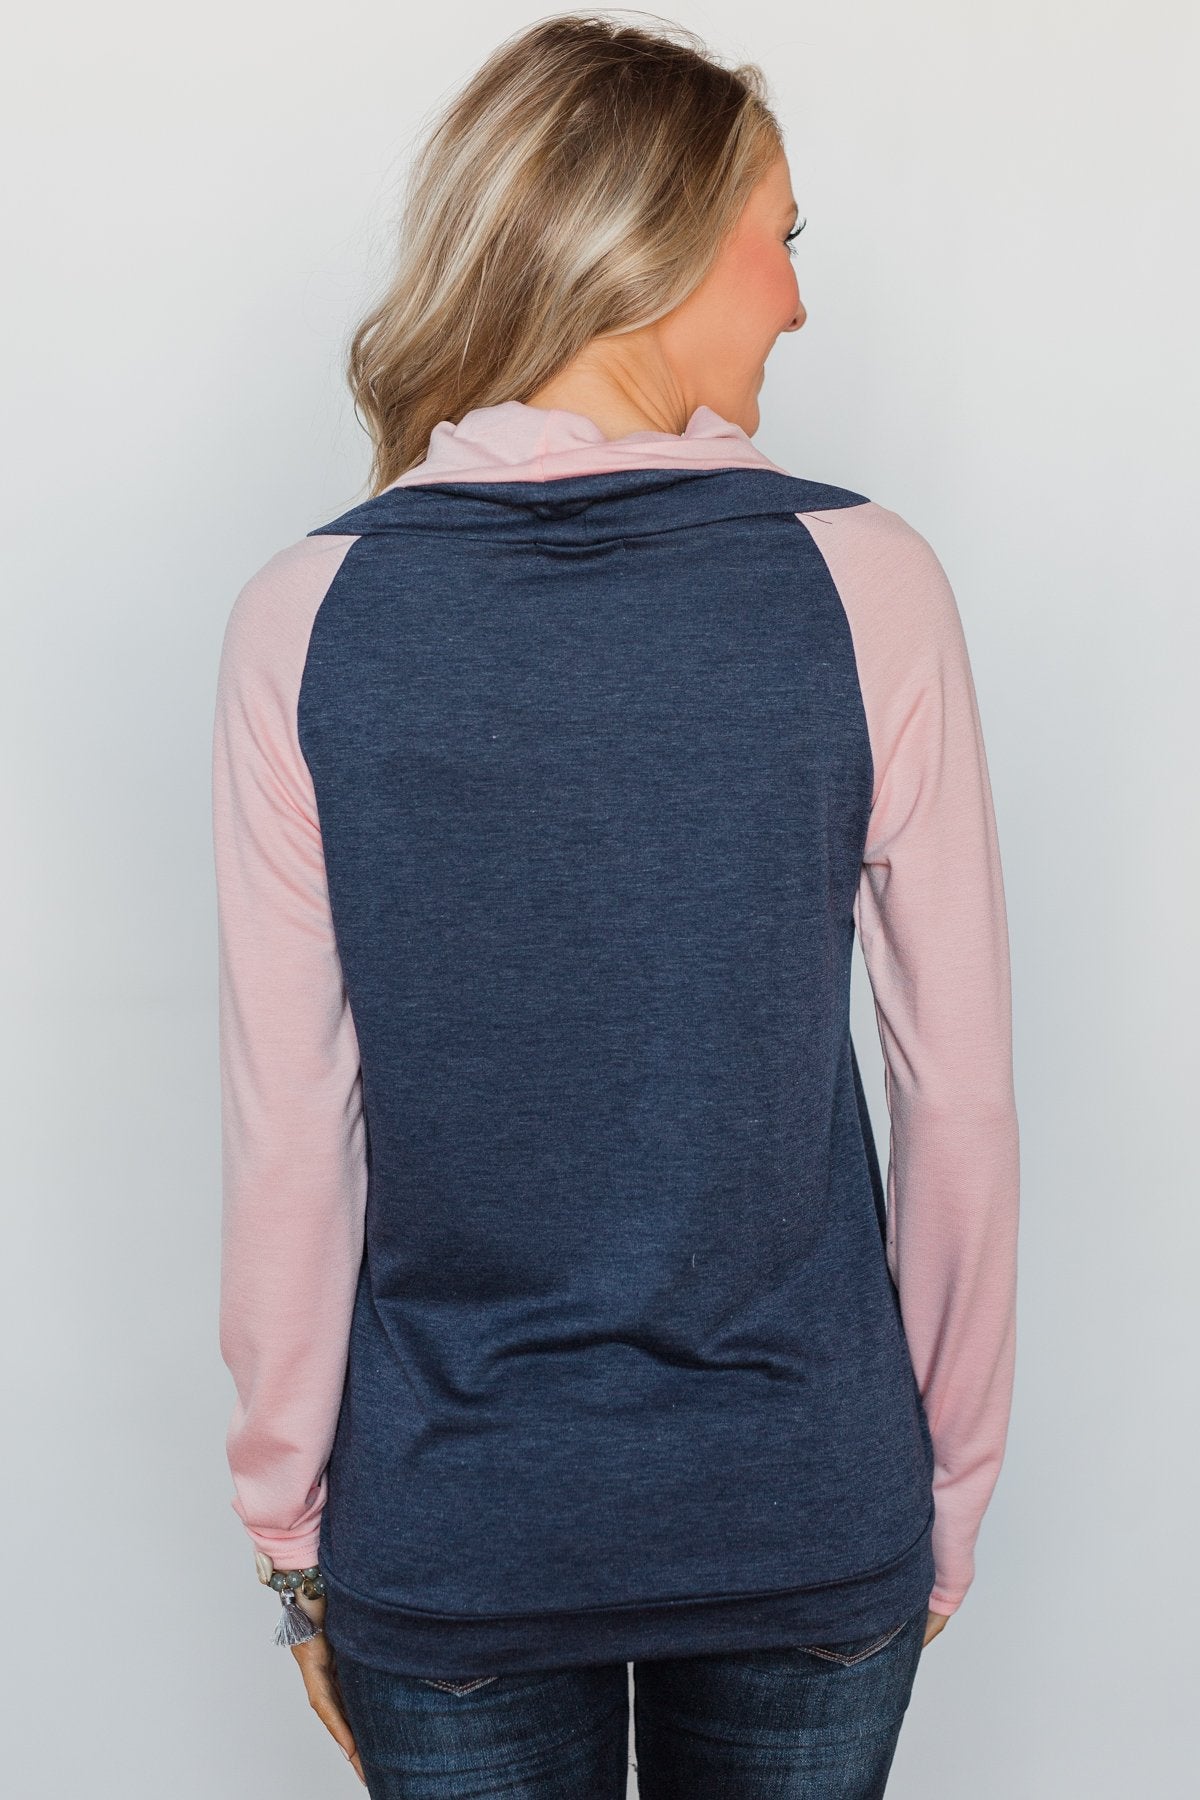 The Ultimate Navy & Blush Cowl Neck Top